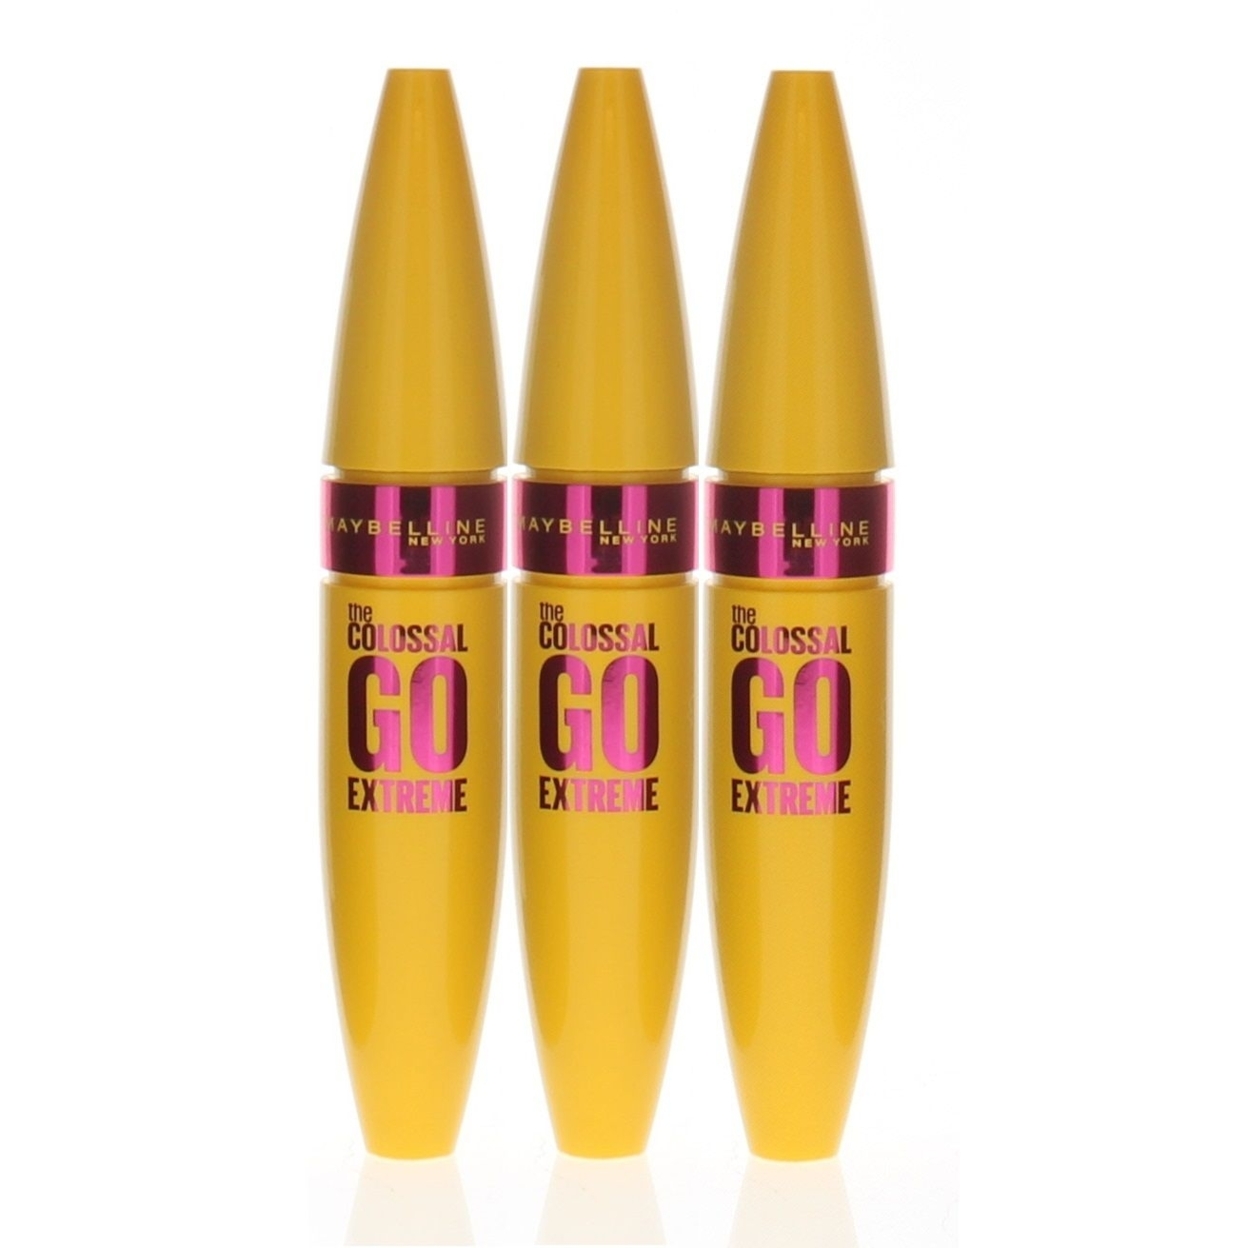 Maybelline The Colossal Go Extreme Mascara Very Black 9.5ml (3 Pack)